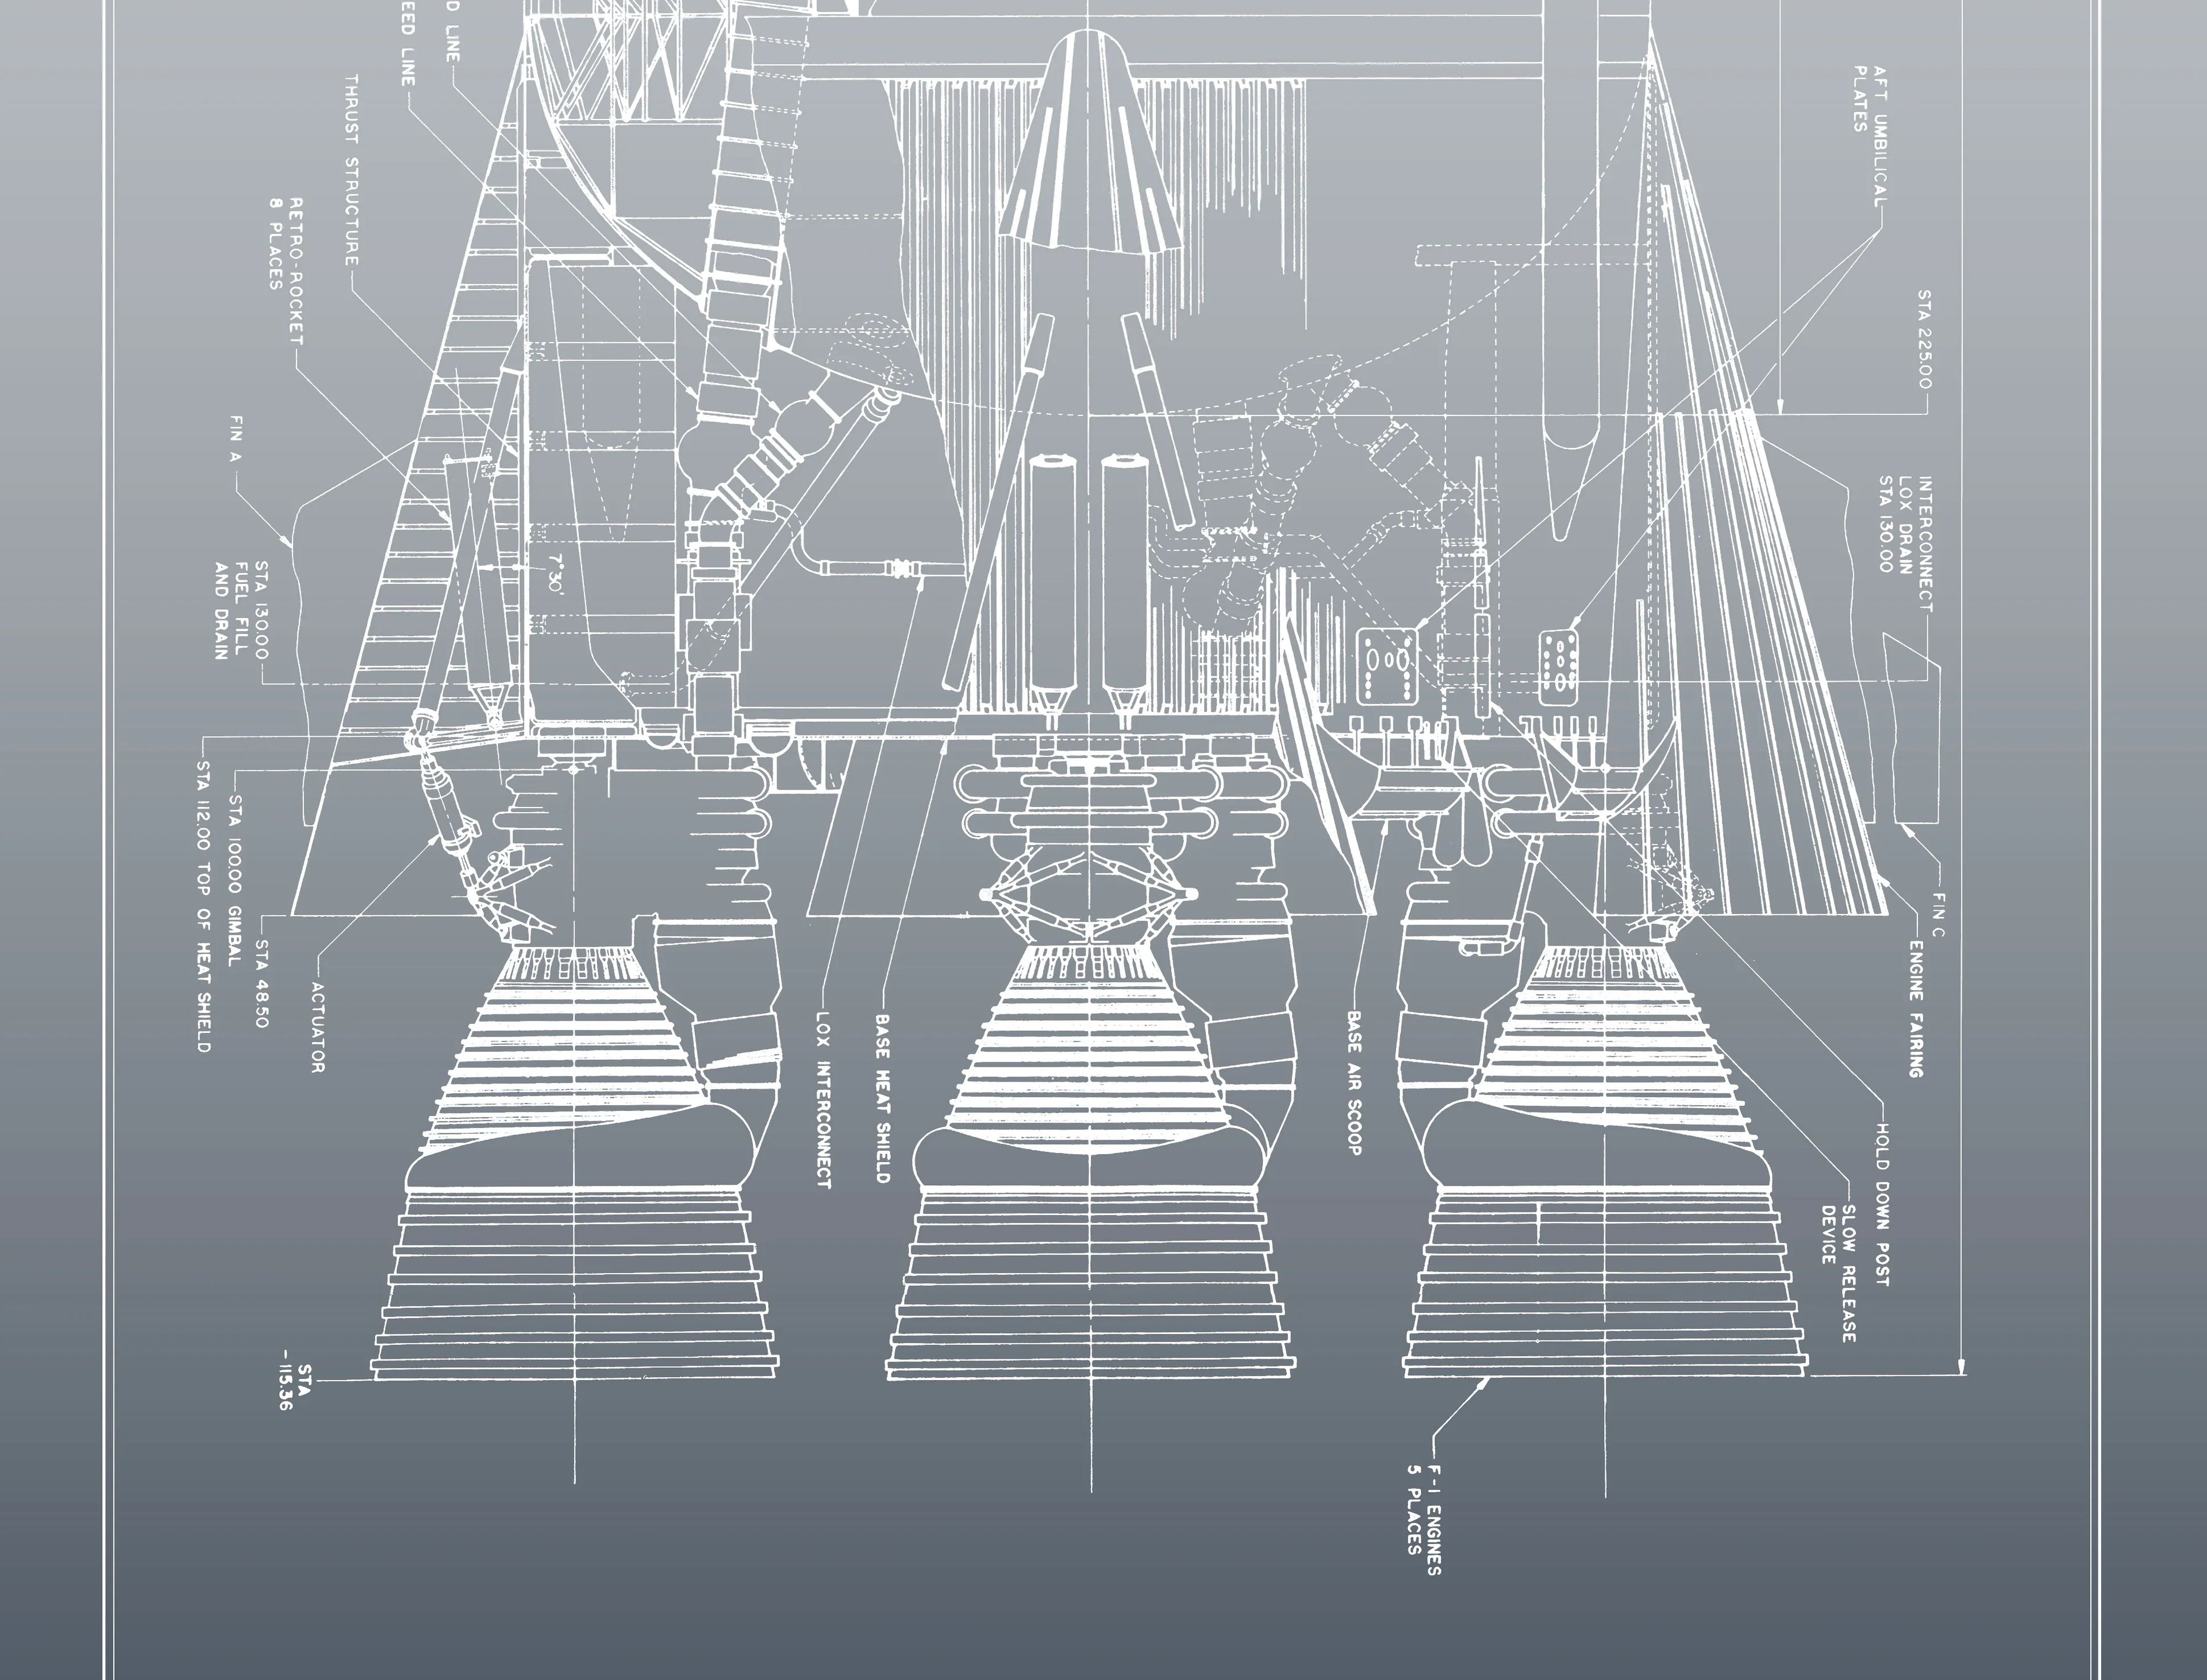 Apollo Saturn V | Rocket Blueprint Posters | NASA | A technical blueprint of the Saturn V rocket is shown against a grey gradient background. The drawing focuses on the lower part of the rocket, depicting the engines and supporting structures with detailed annotations.